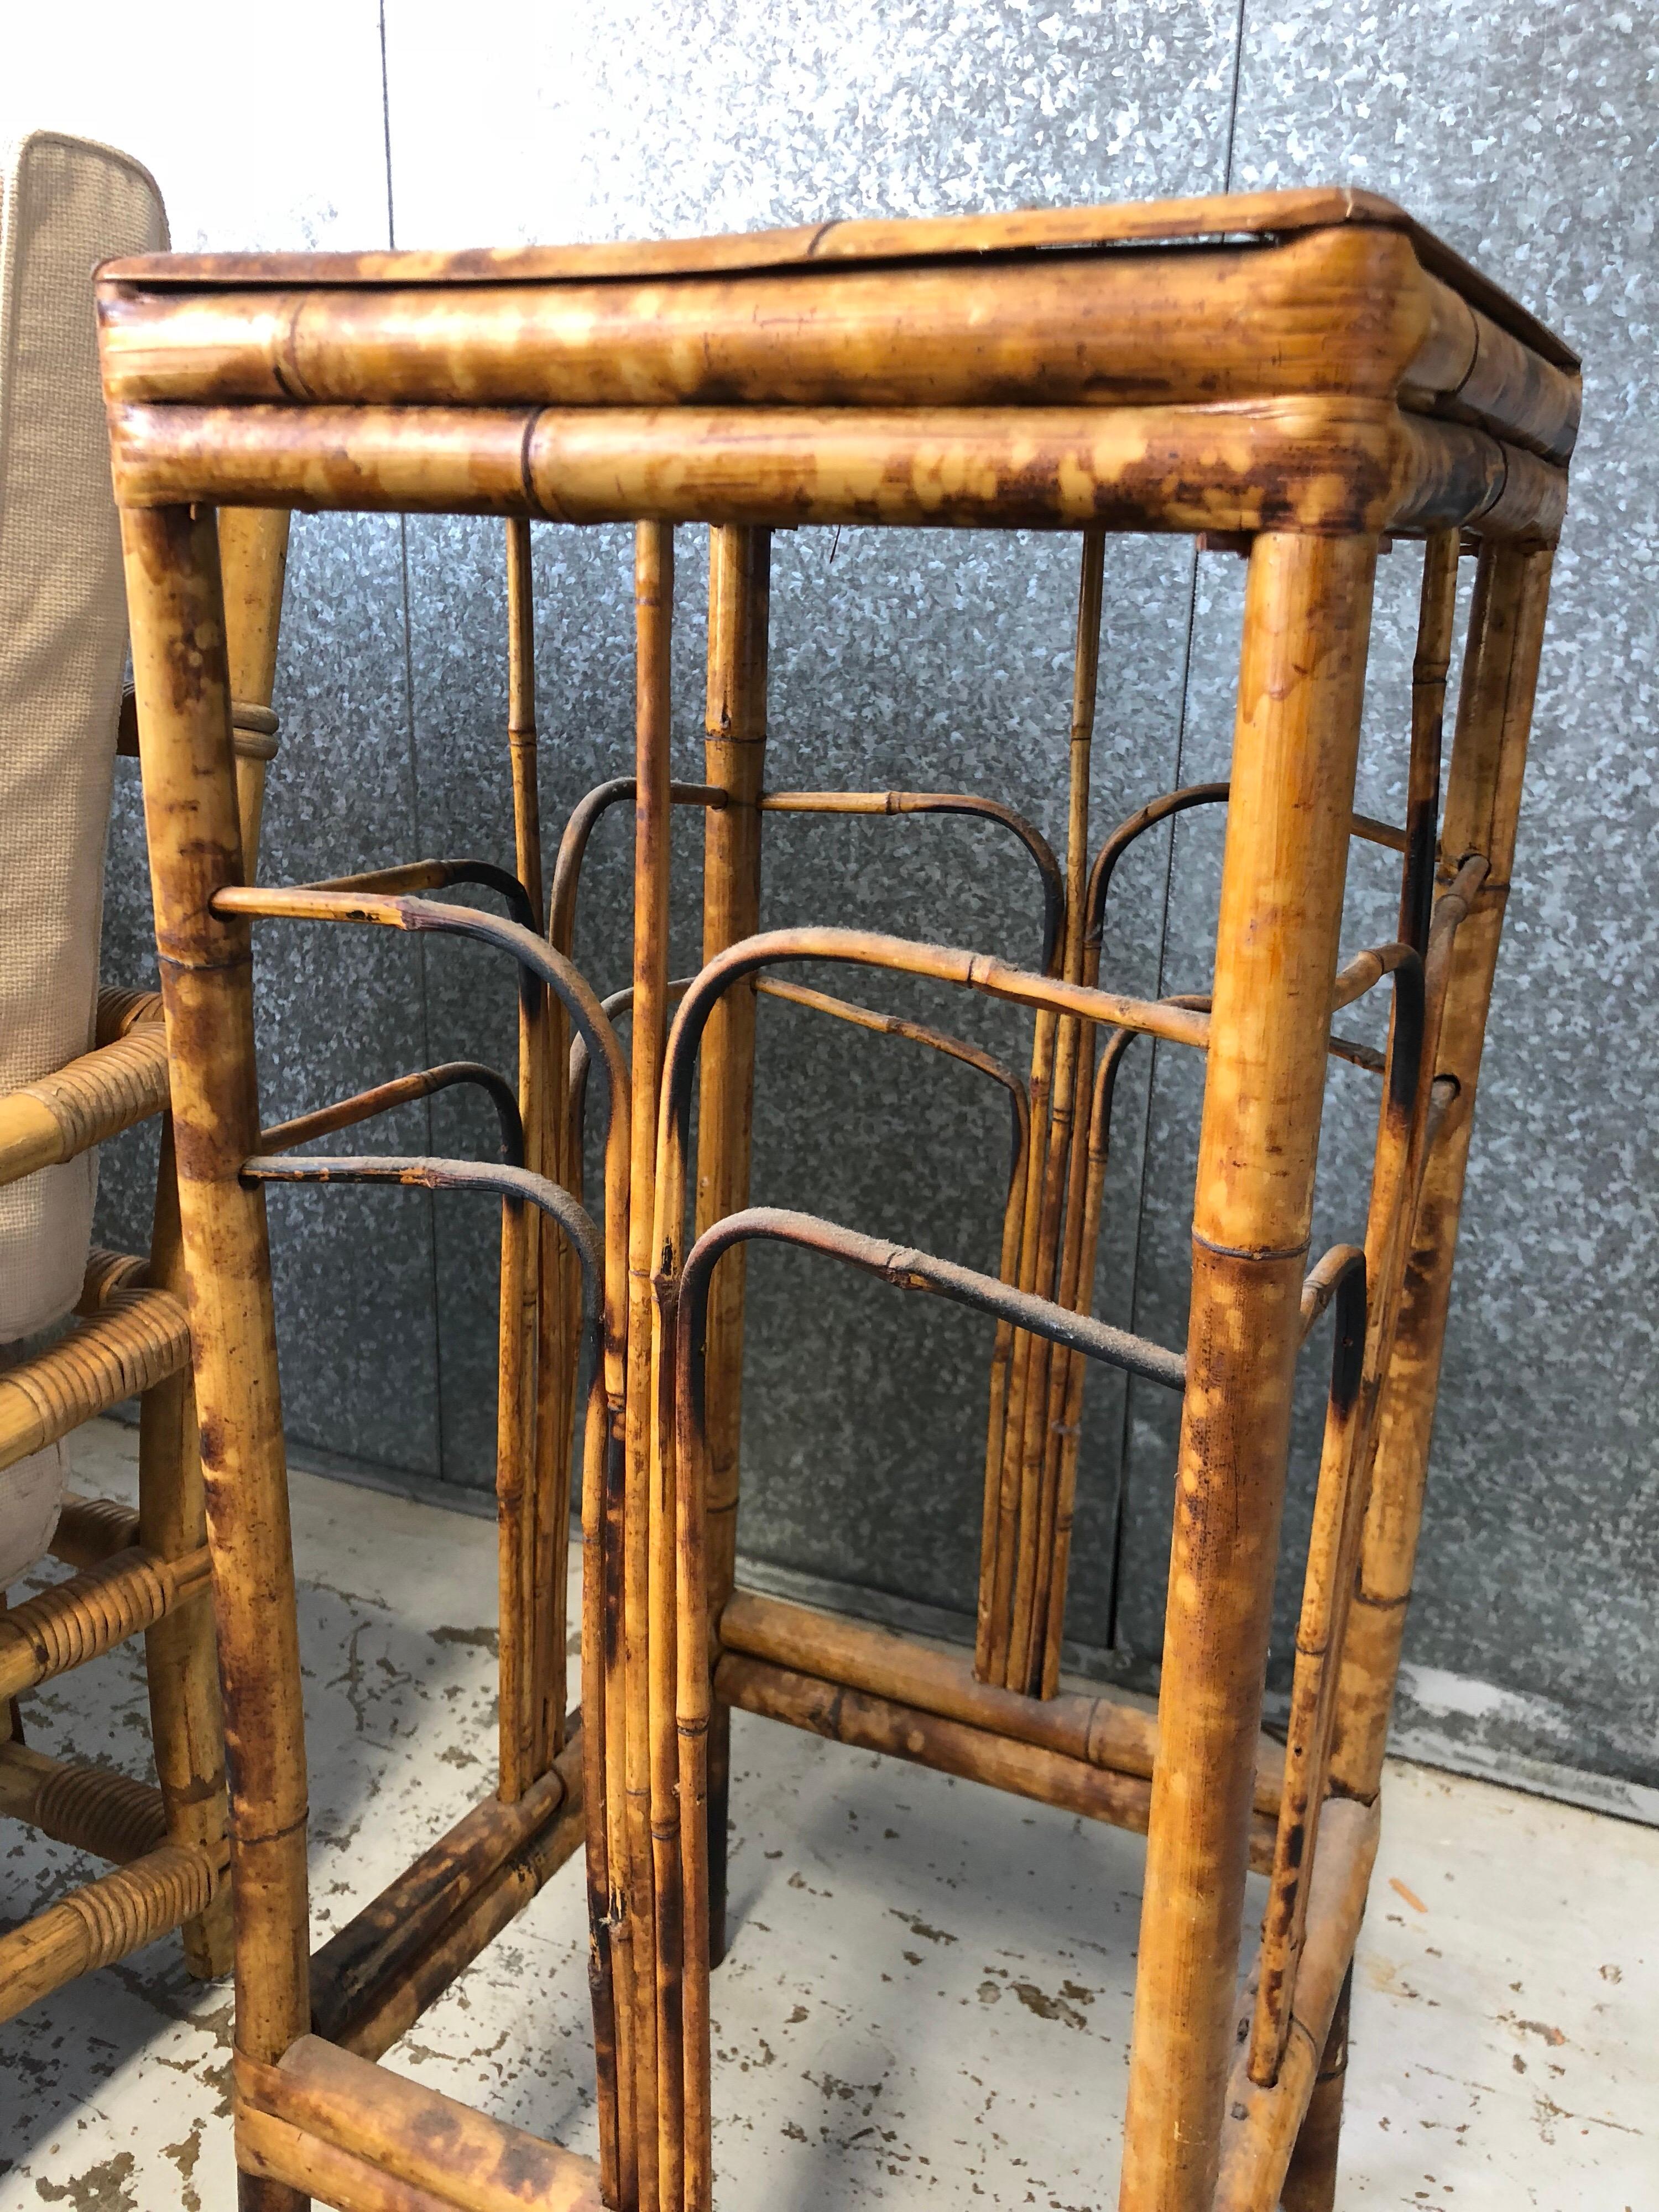 Antique Tiger Bamboo Plant Stand or Occasional Table In Good Condition For Sale In Church Point, NSW